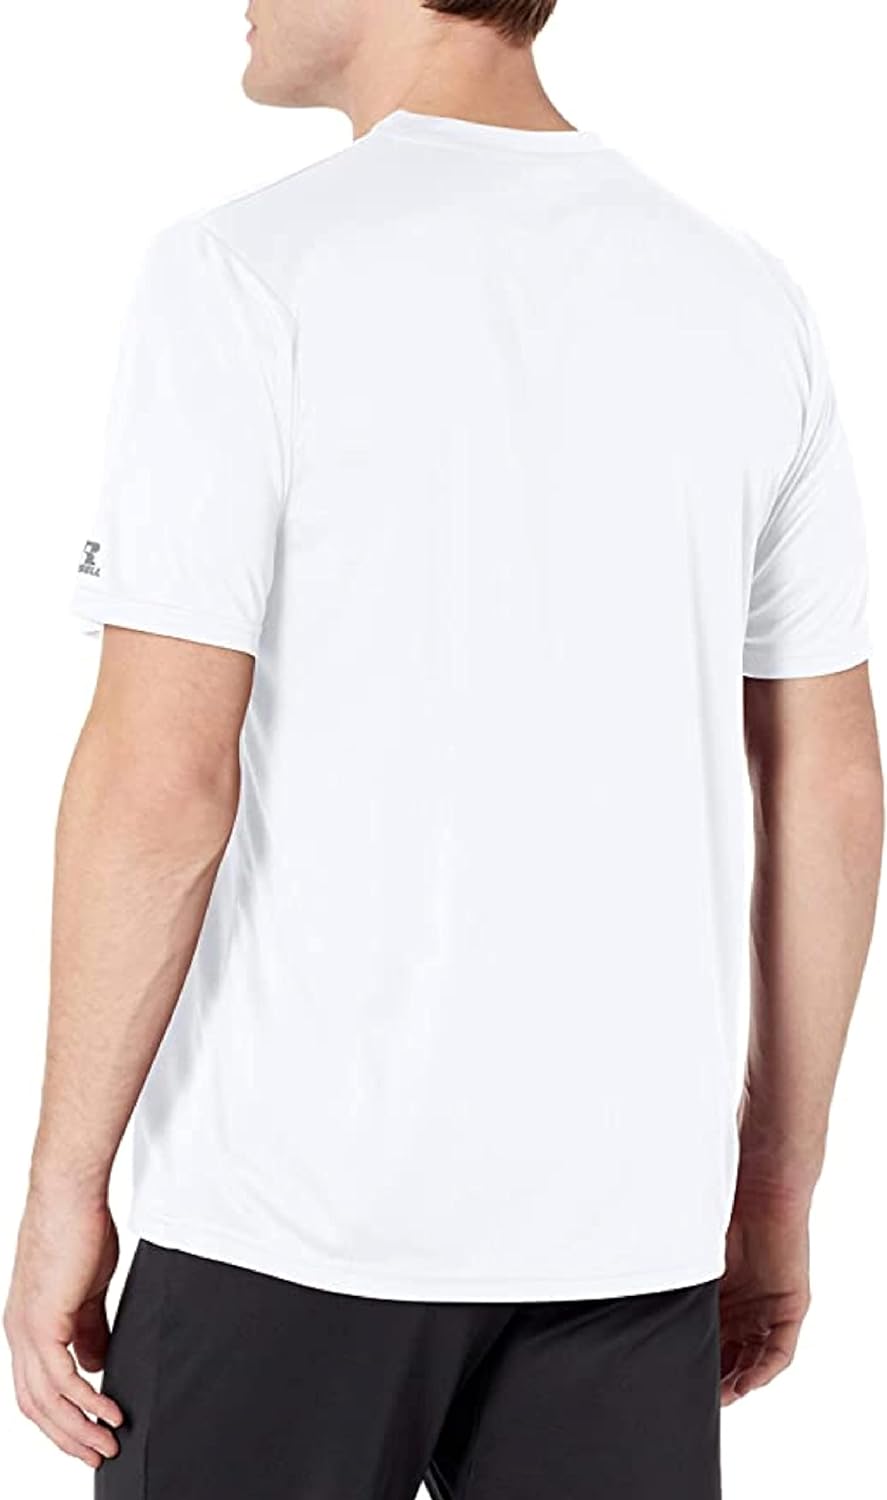 Russell Athletic Men's Performance T-Shirt, White, Small